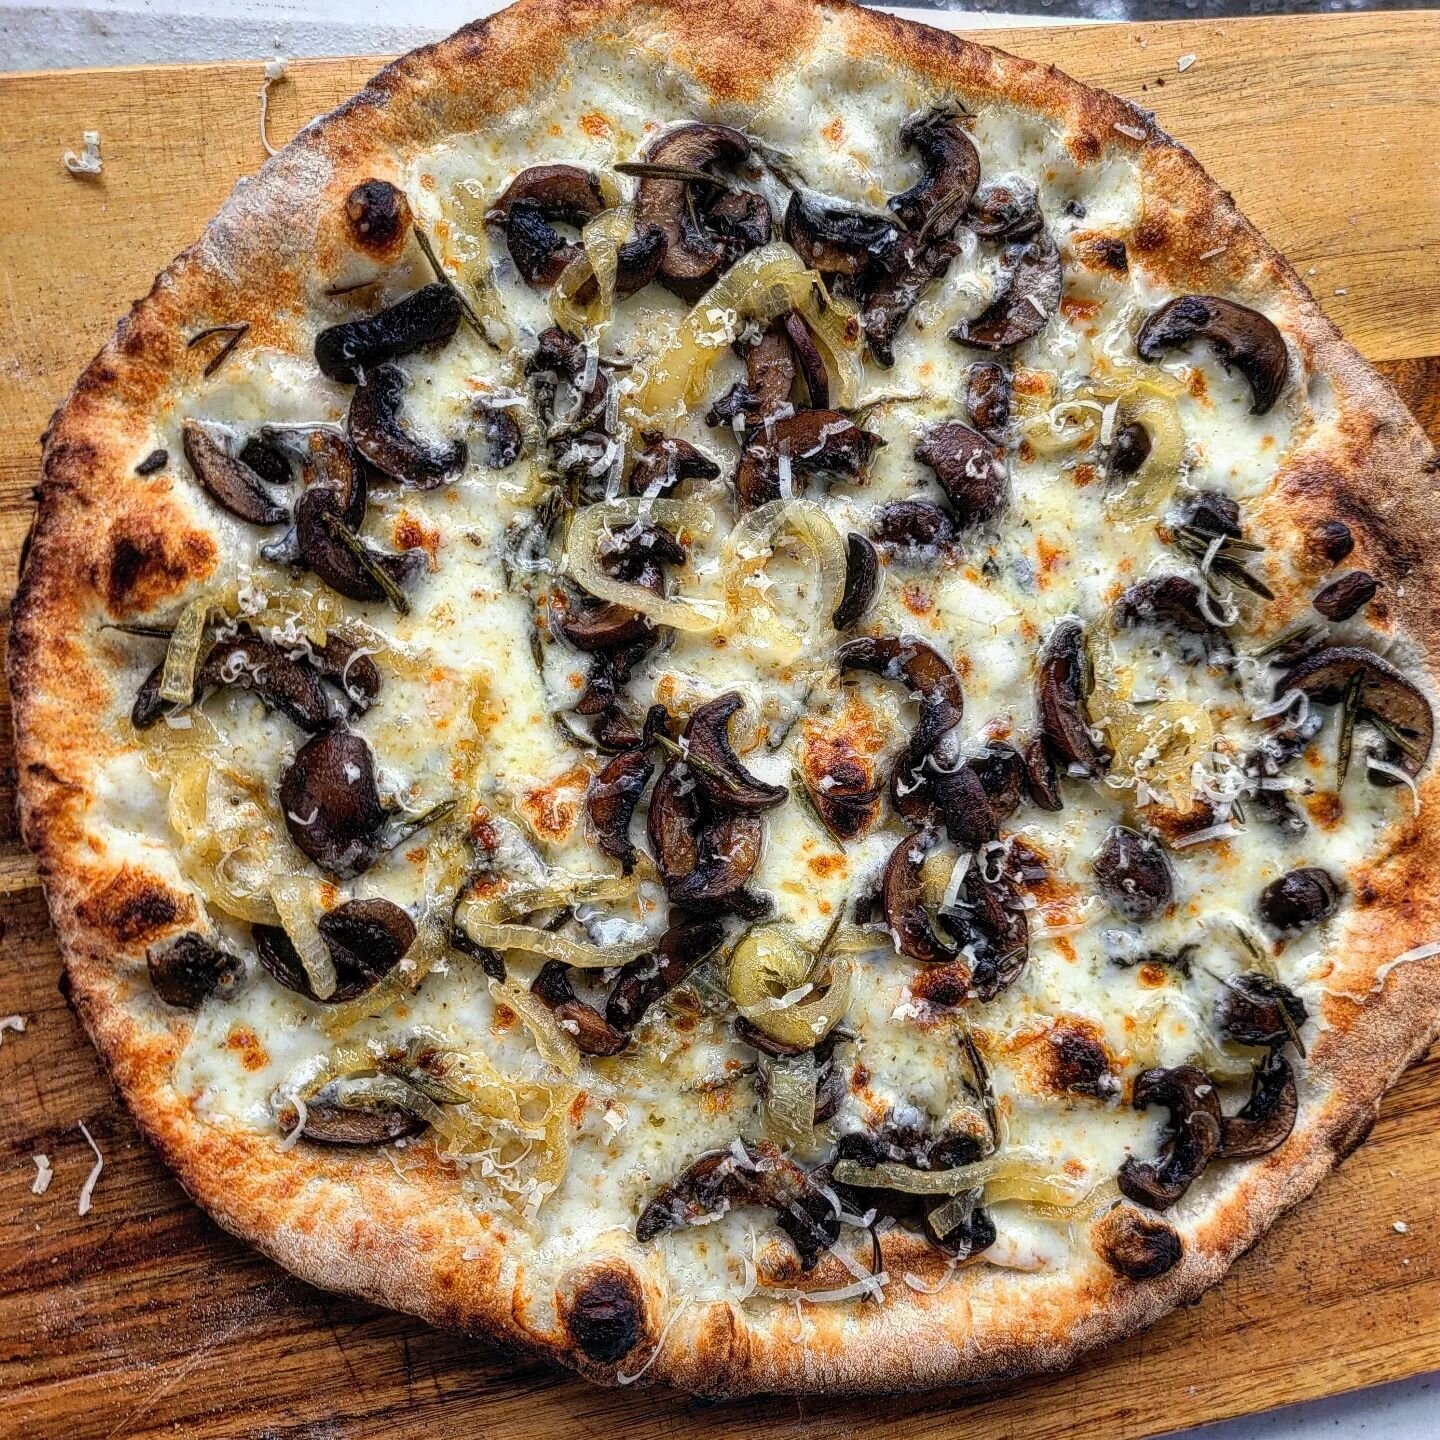 One of my favorites from our first party of the year:

Herb Roasted Mushrooms, Caramelized Onions, Mozzarella, Moliterno al Tartufo (sheep's milk truffle cheese), Truffle Oil

#pizza #pizzapizza #pizzaparty #pizzatime #pizzalife #pizzalover #pizzagra